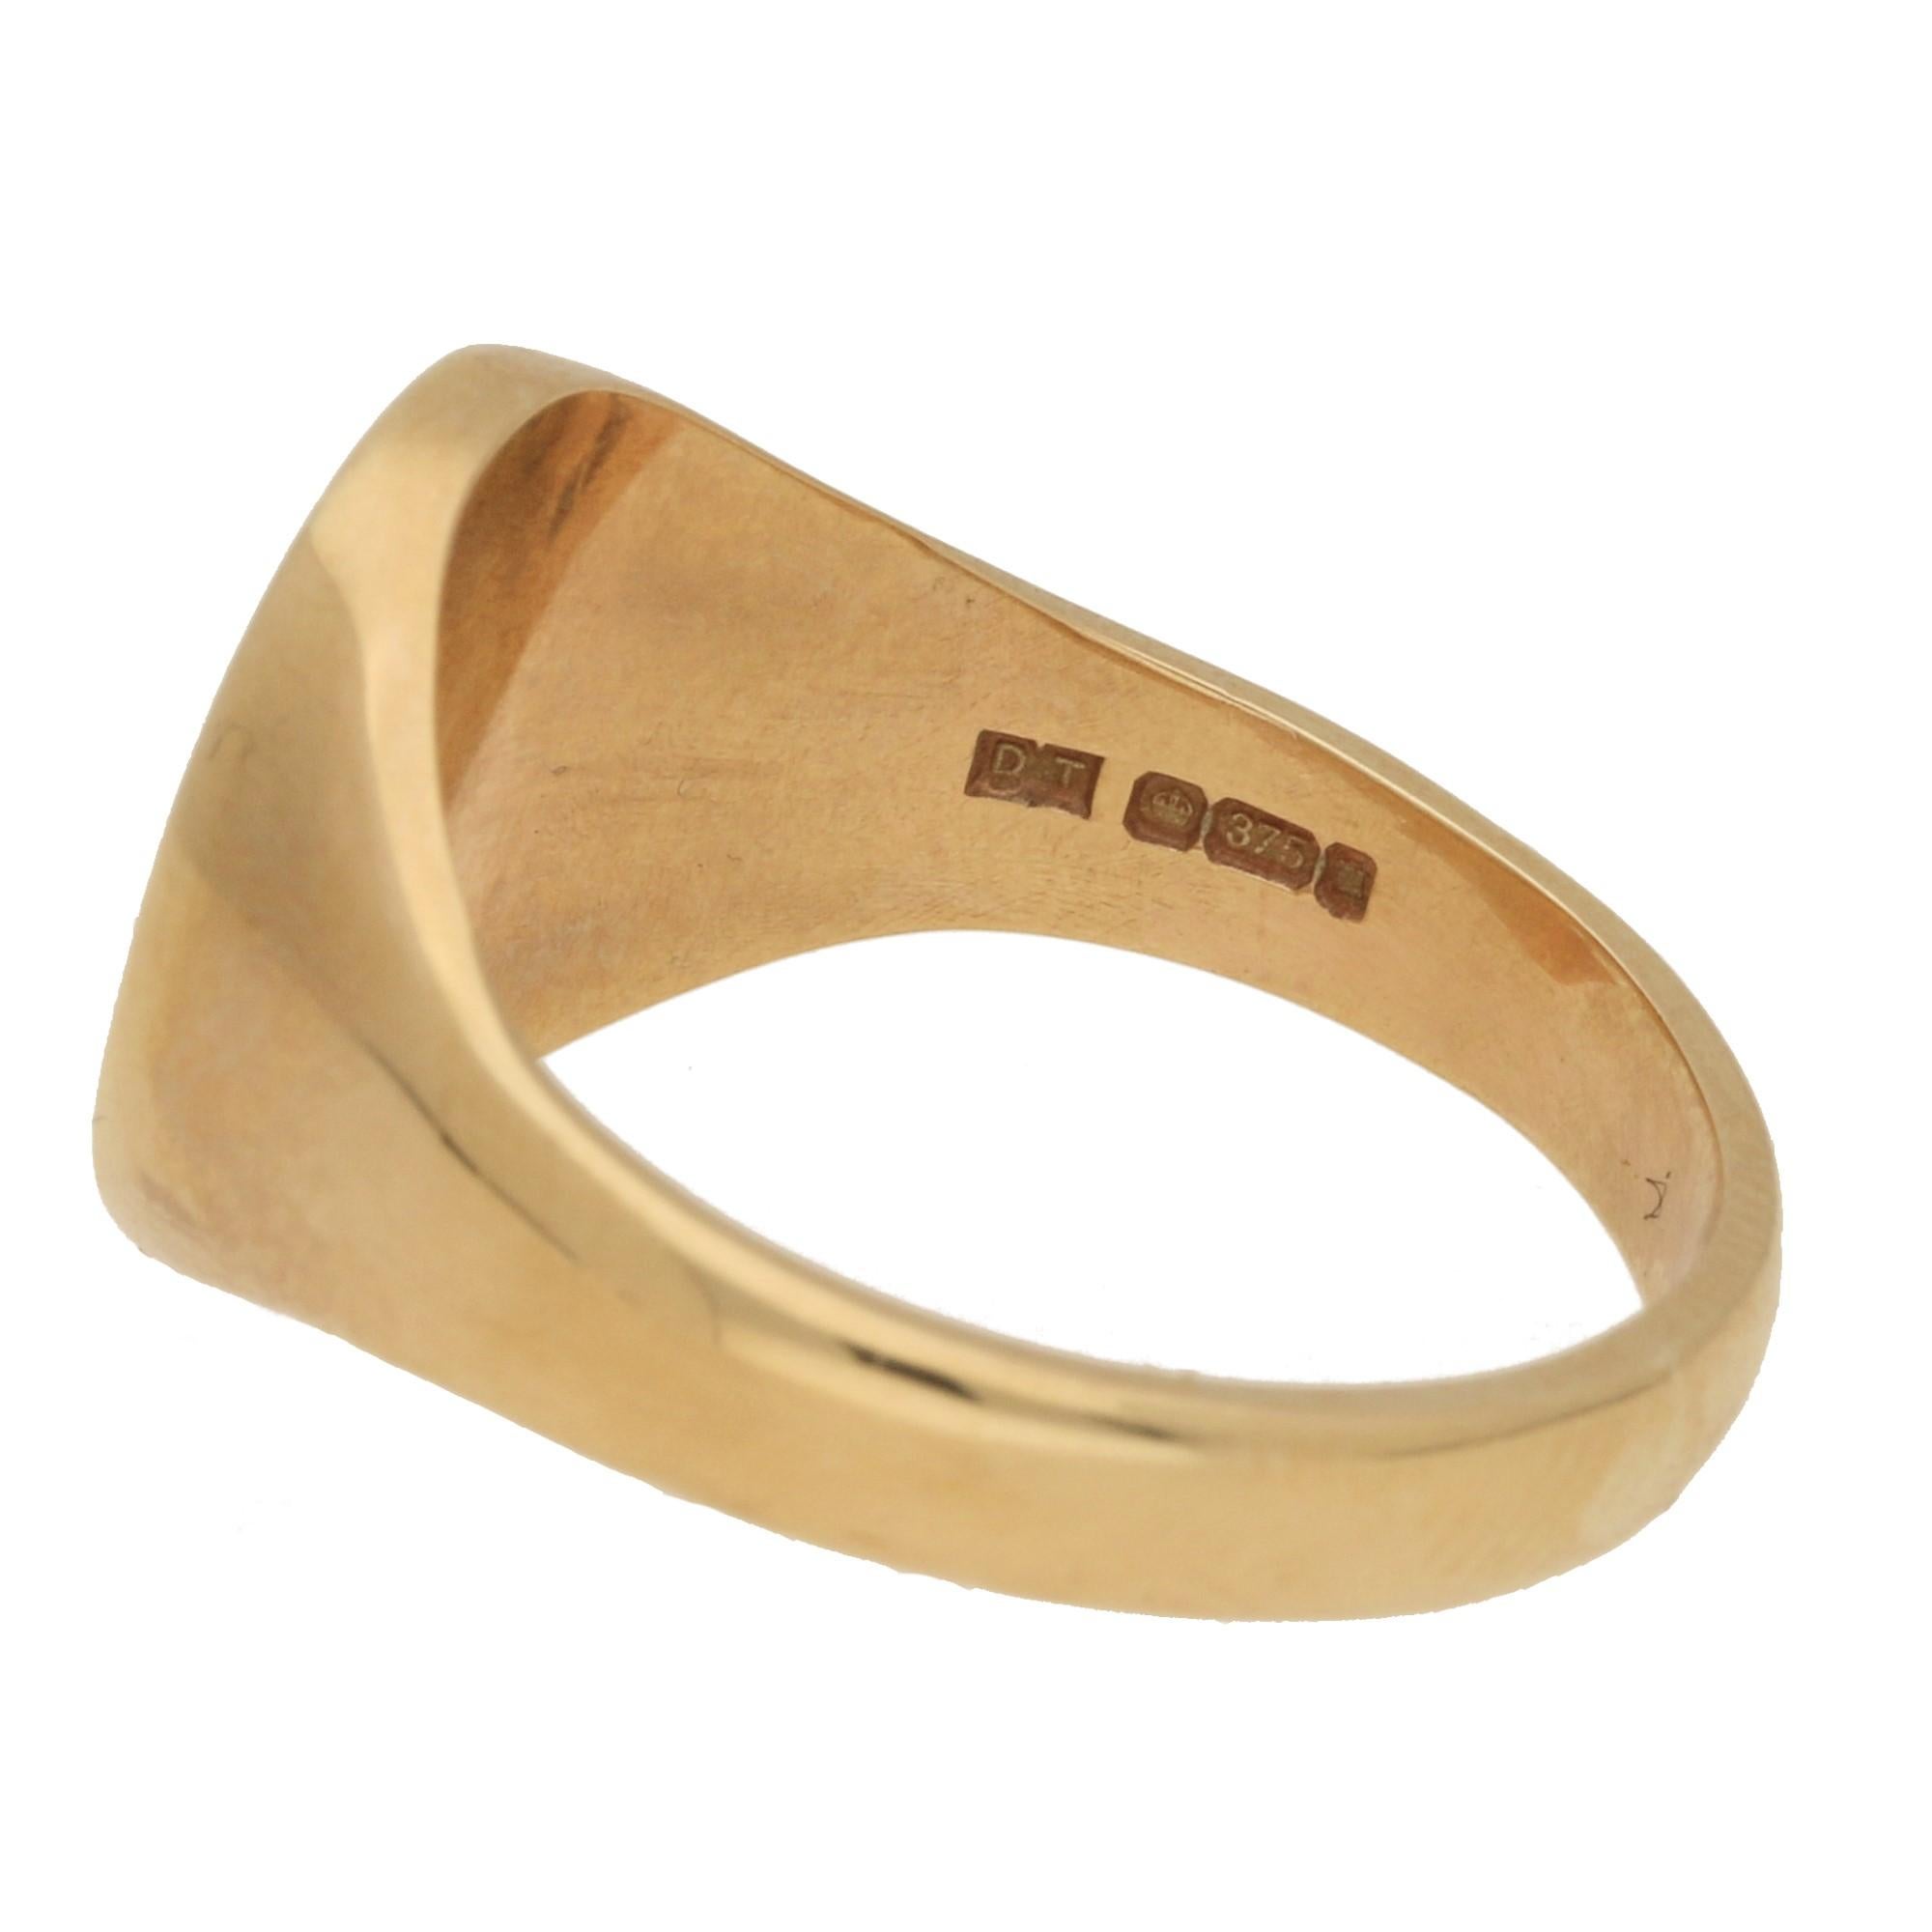 A classic oval signet ring made of solid 9k yellow gold. 

The ring head measures approximately 12 x 10mm and is left bare so that the wearer has the option to customise it in the future. Typically signets are decorated with a family crest or